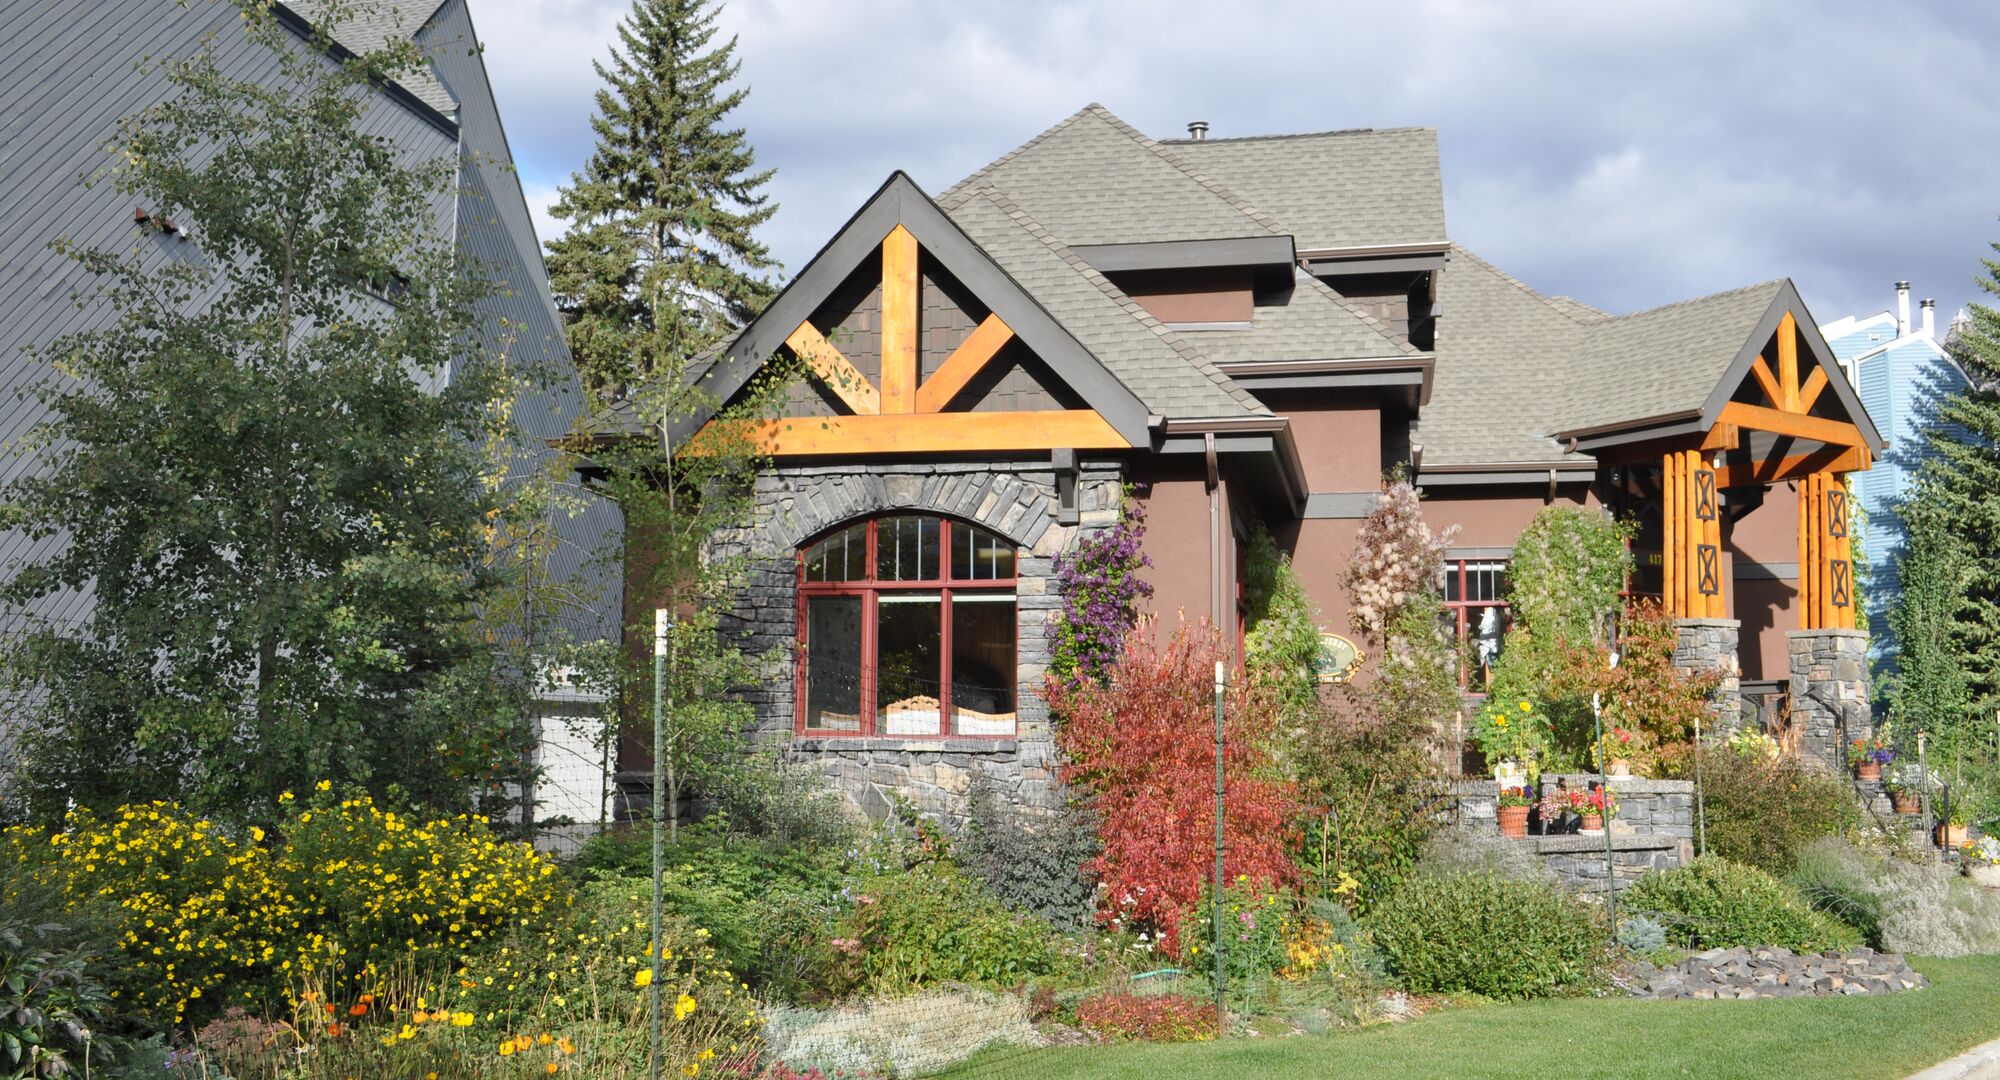 A charming B&B surrounded by a colourful garden on a Summer day in Banff